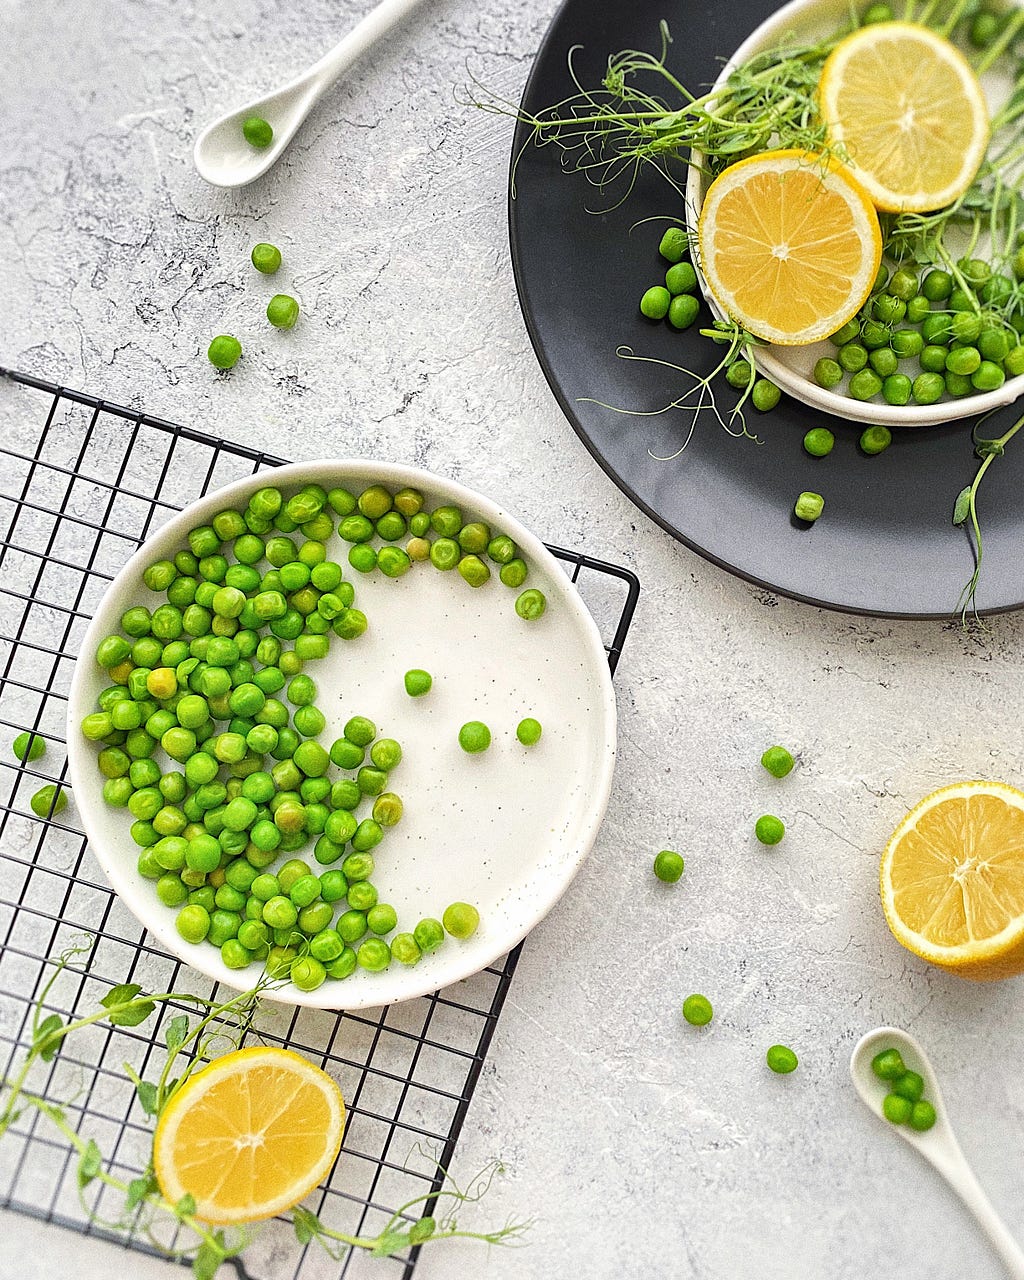 Green Peas are an excellent vegan source of protein.